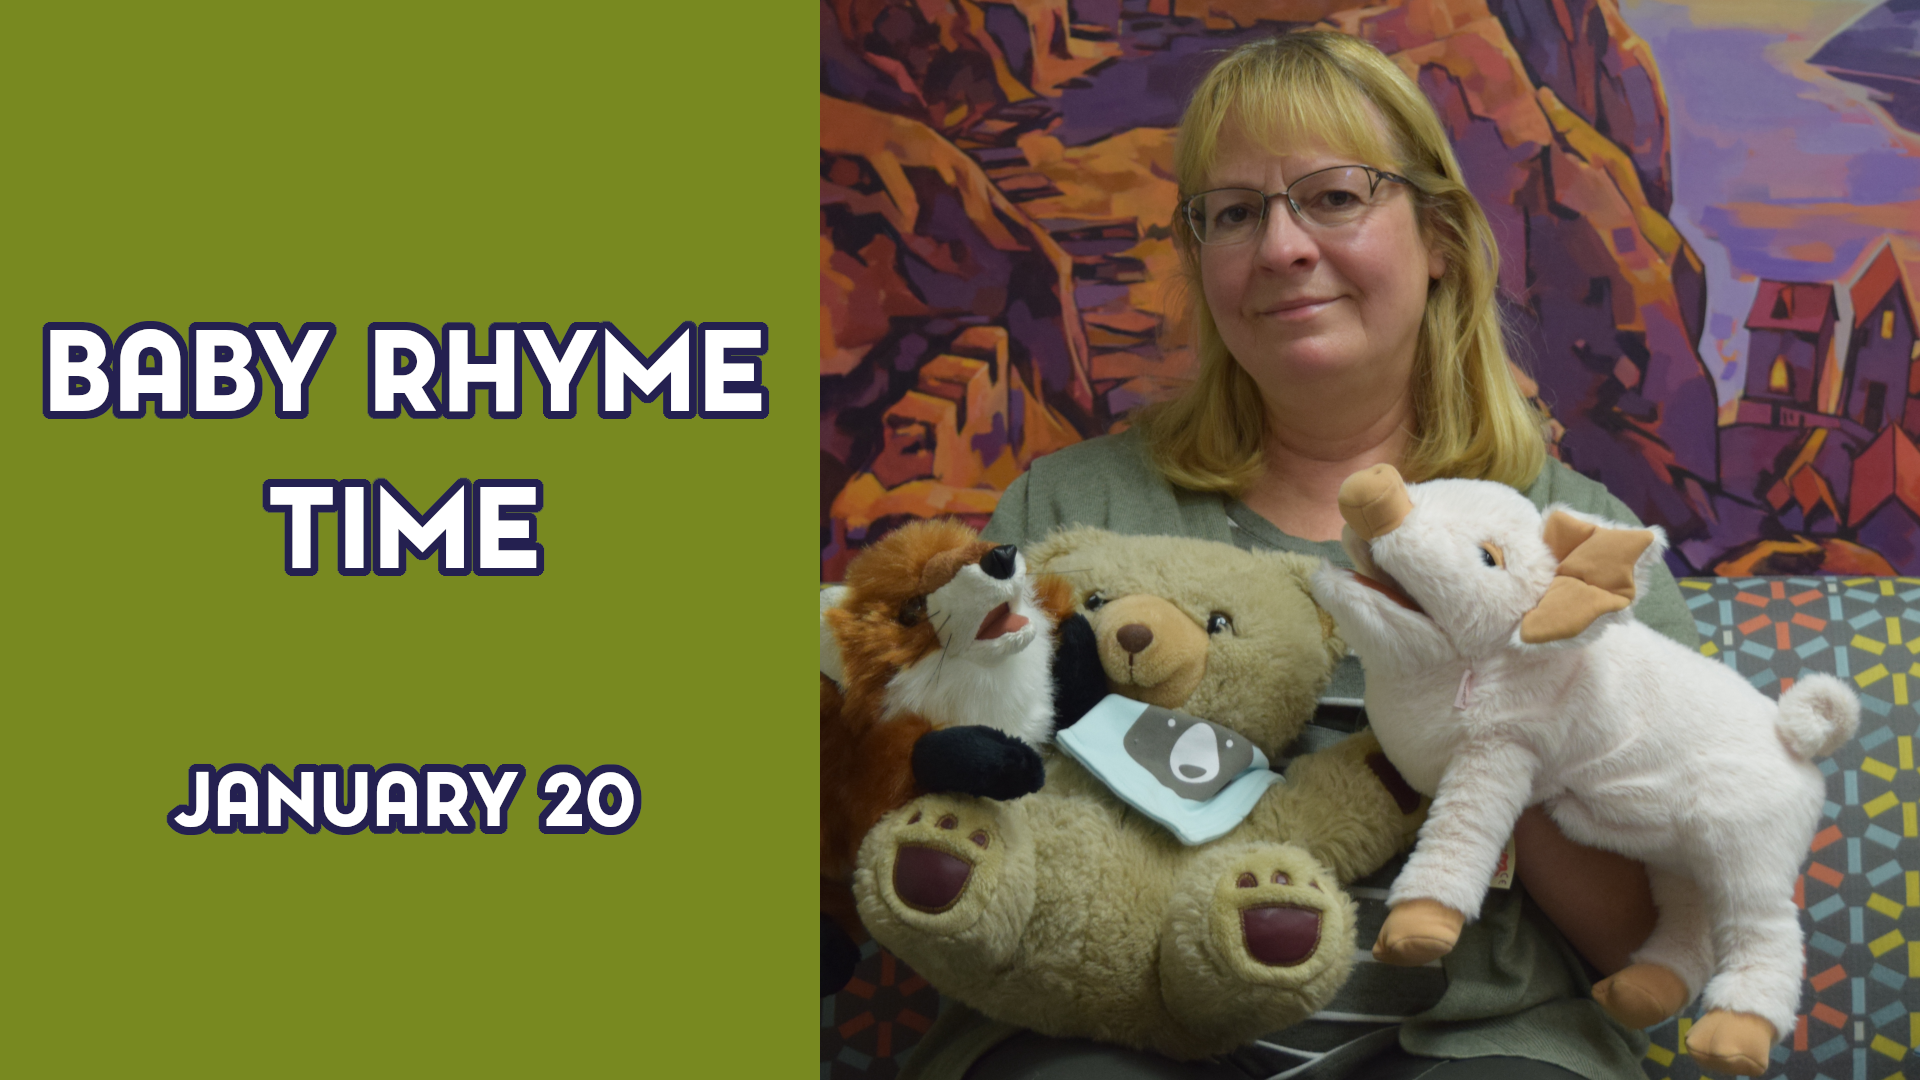 A woman holds up puppets next to the text "Baby Rhyme Time January 20"